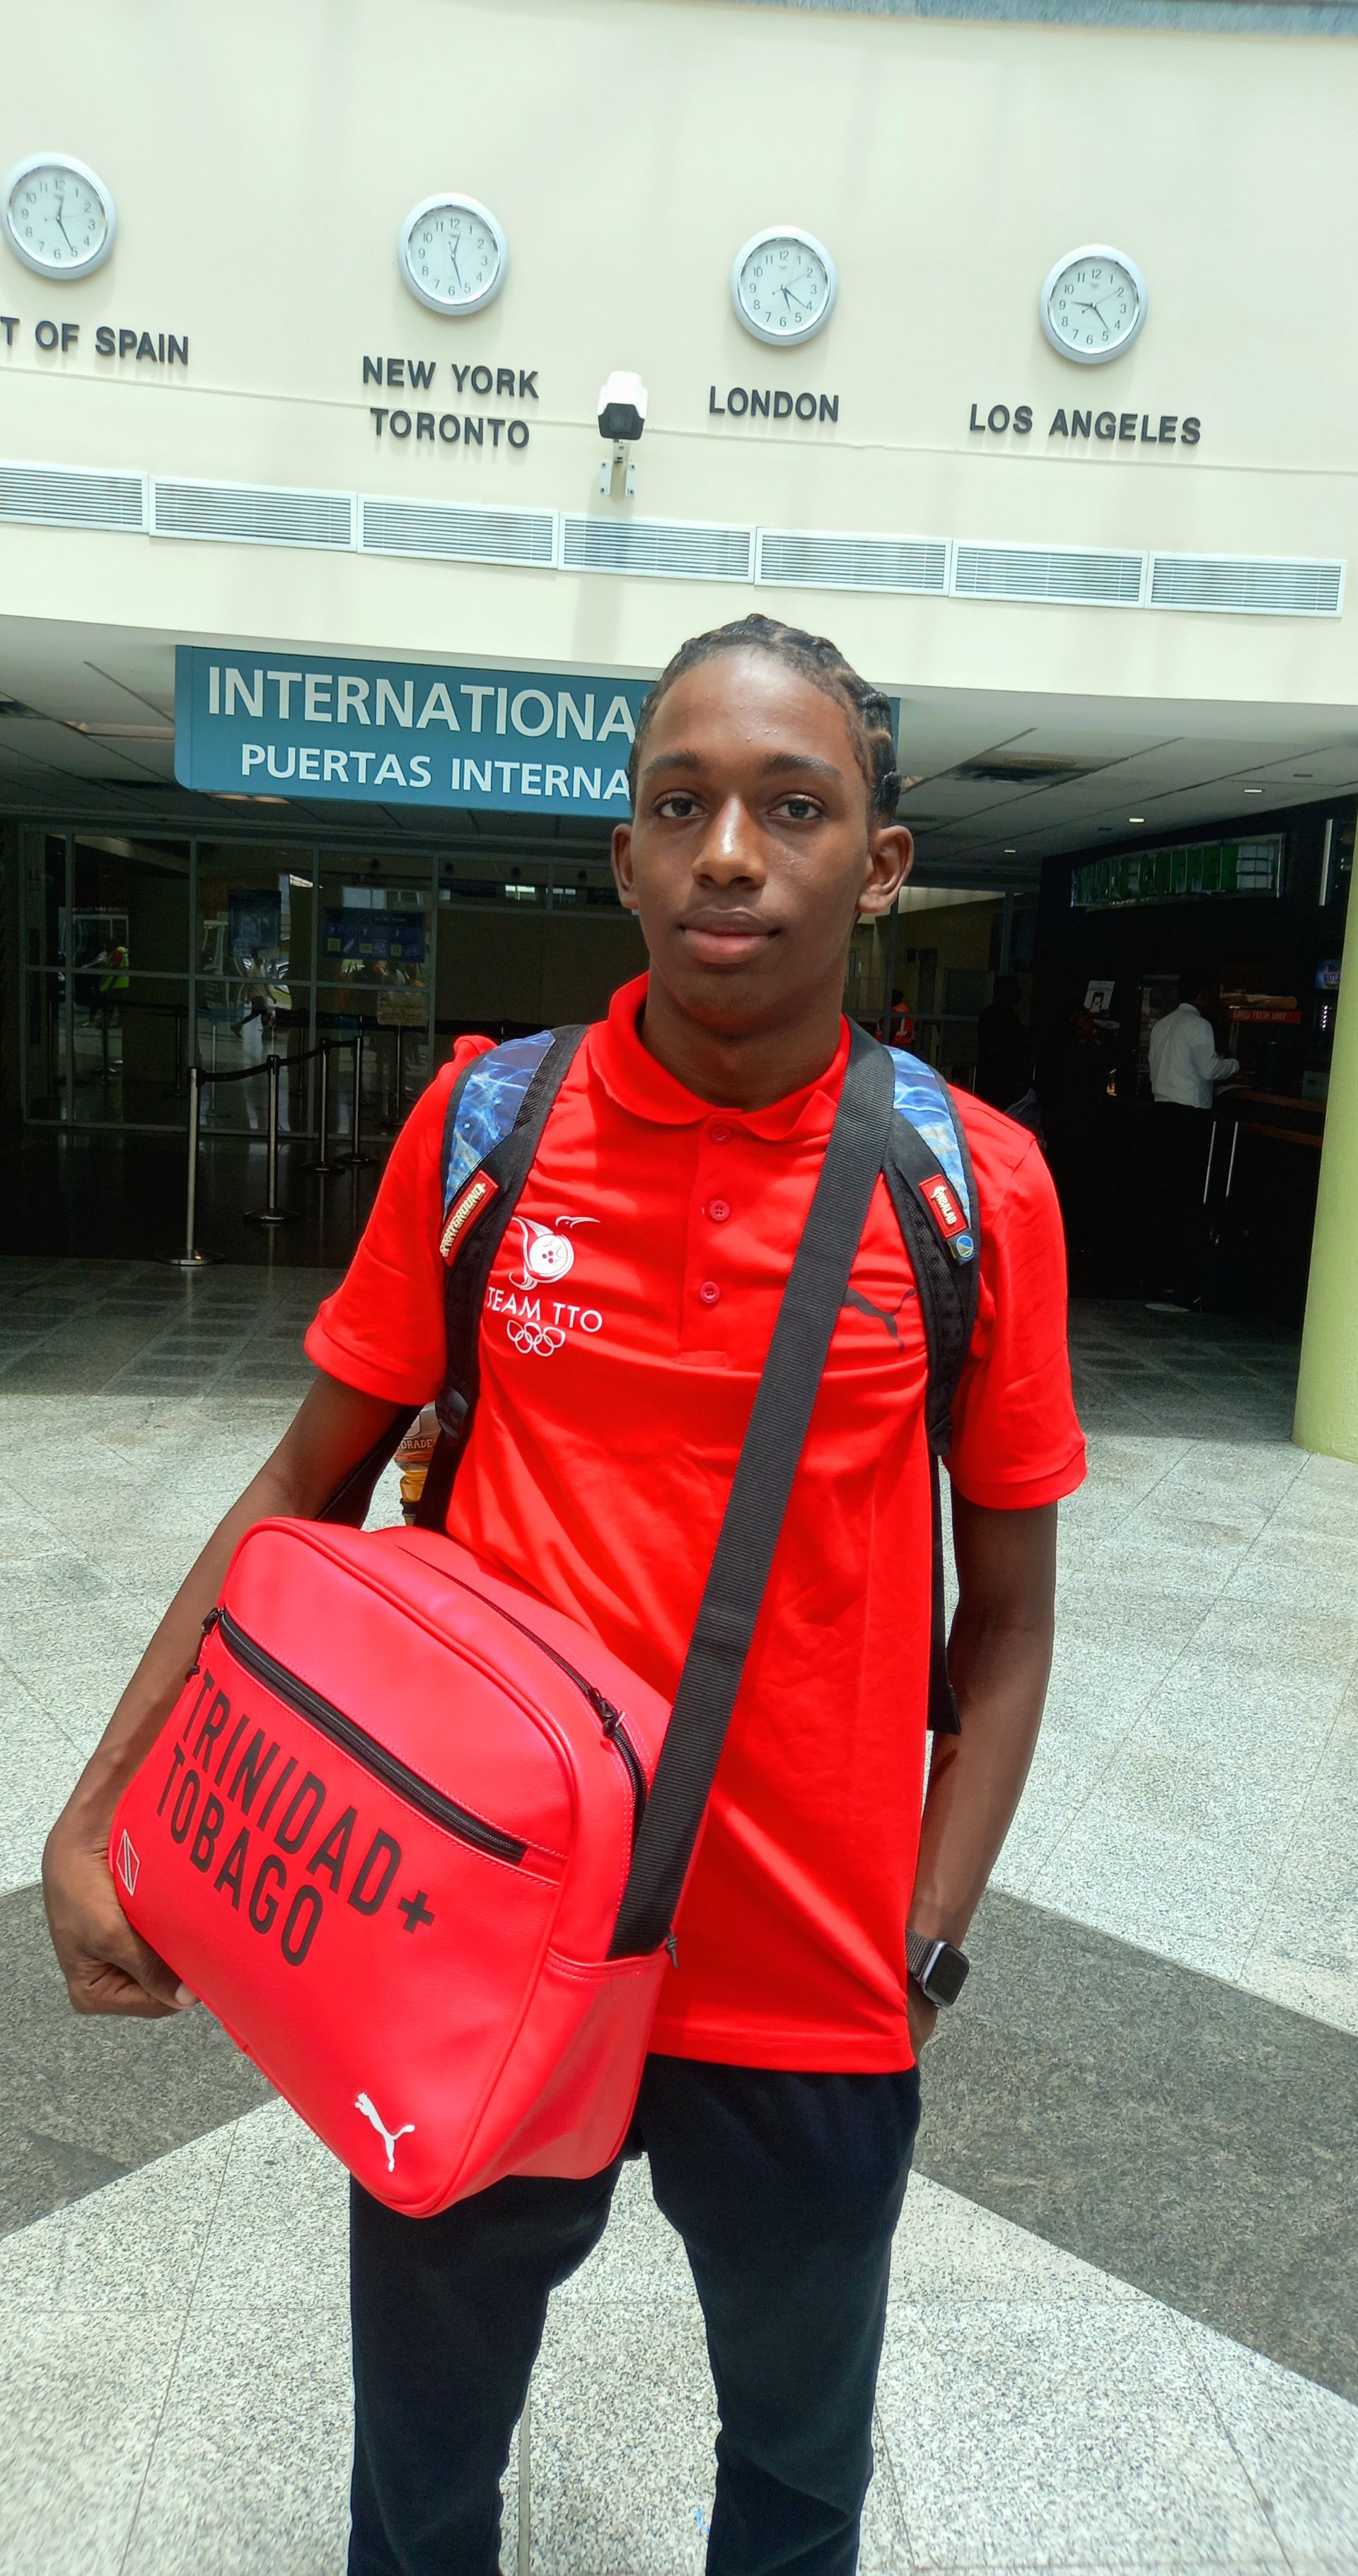 Chris Roberts of Bishops High Tobago left for Montreal, Canada on Wednesday (June 21) for the NBA/FIBA Basketball Without Borders Training Camp from June 22-25. Roberts is the lone T&T player attending the camp. (Image obtained at guardian.co.tt)